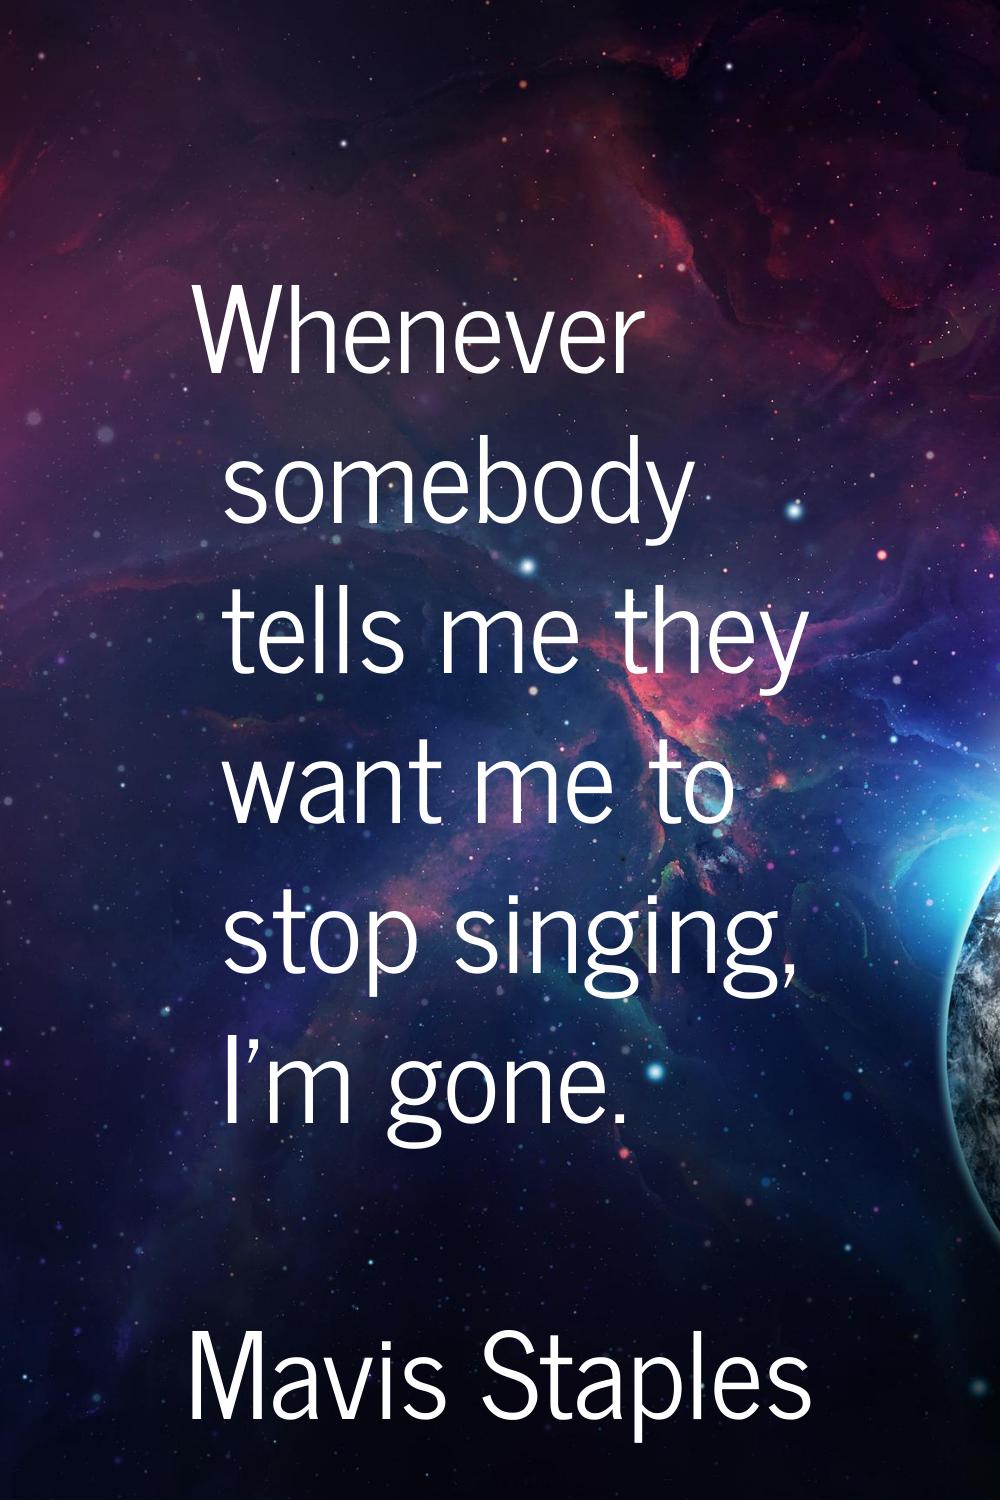 Whenever somebody tells me they want me to stop singing, I'm gone.